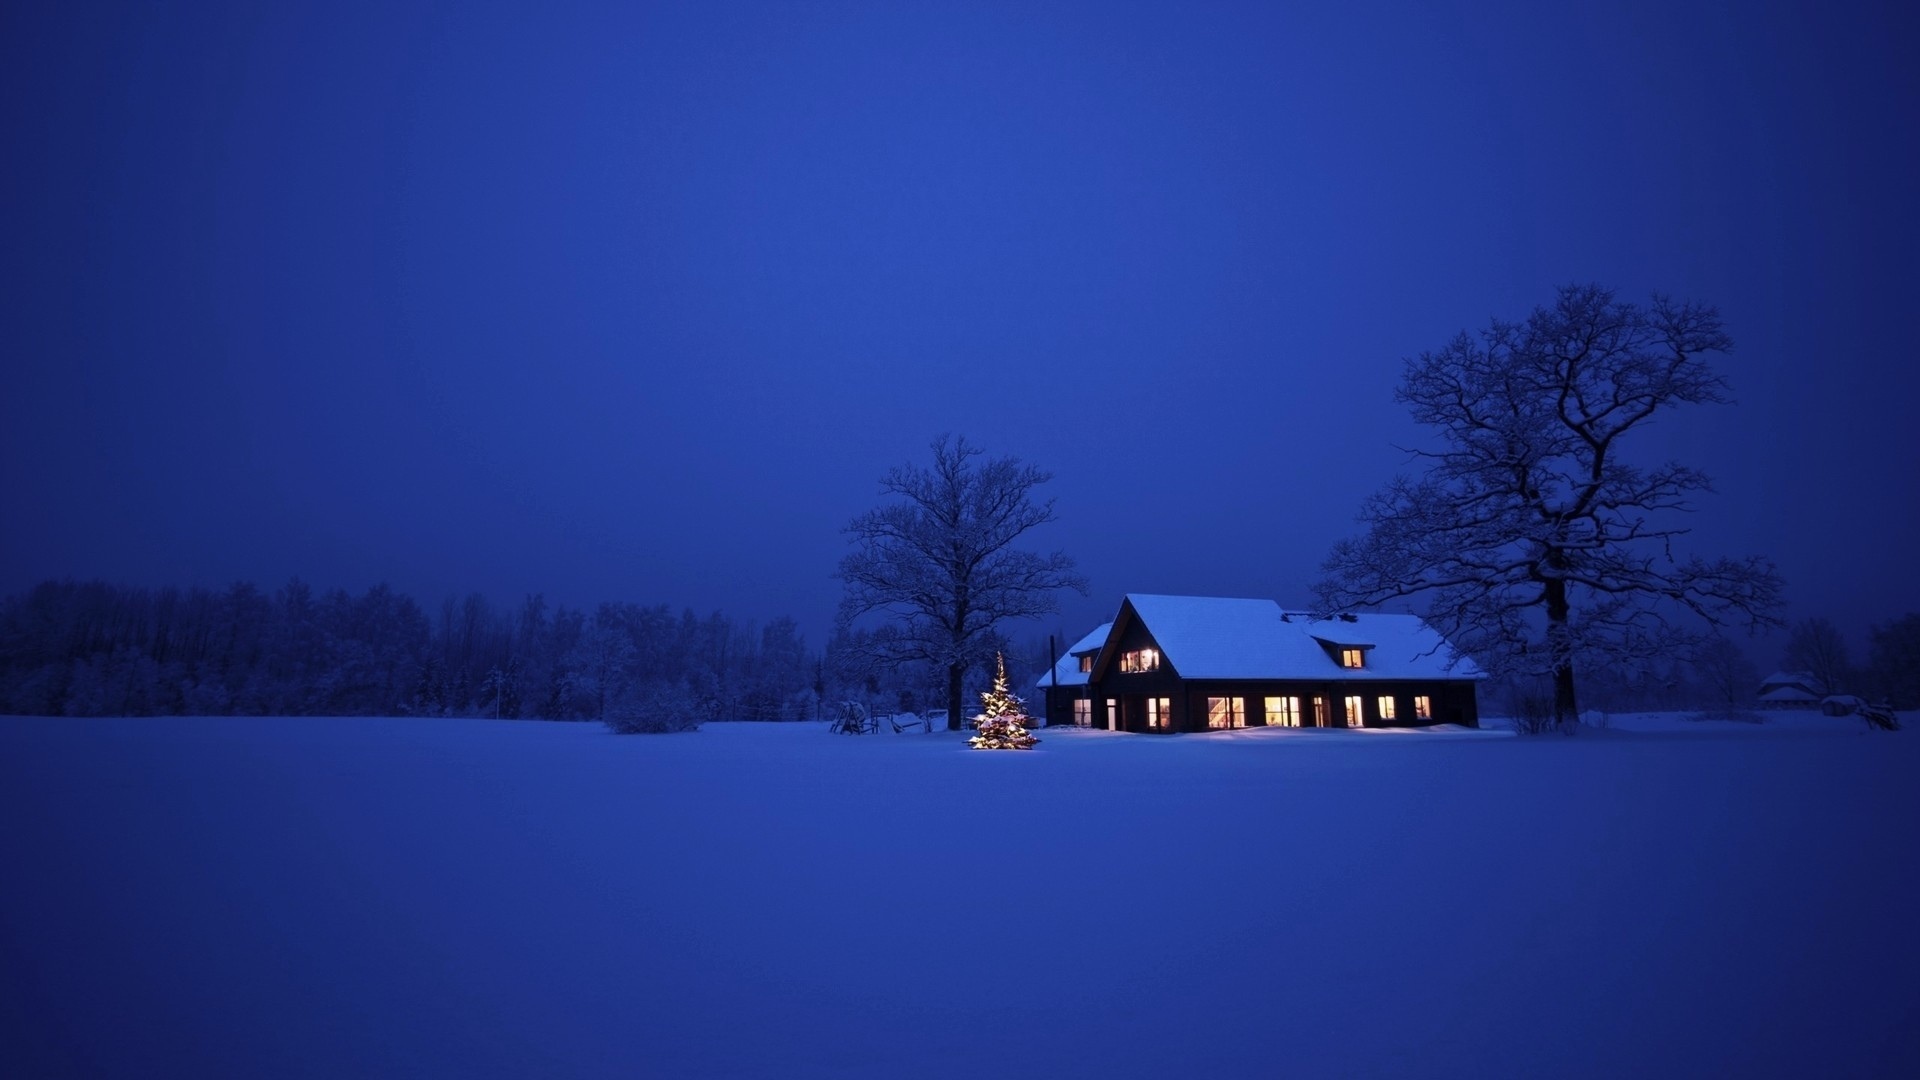 snow, houses, christmas xmas, new year, landscape, holidays, winter, blue